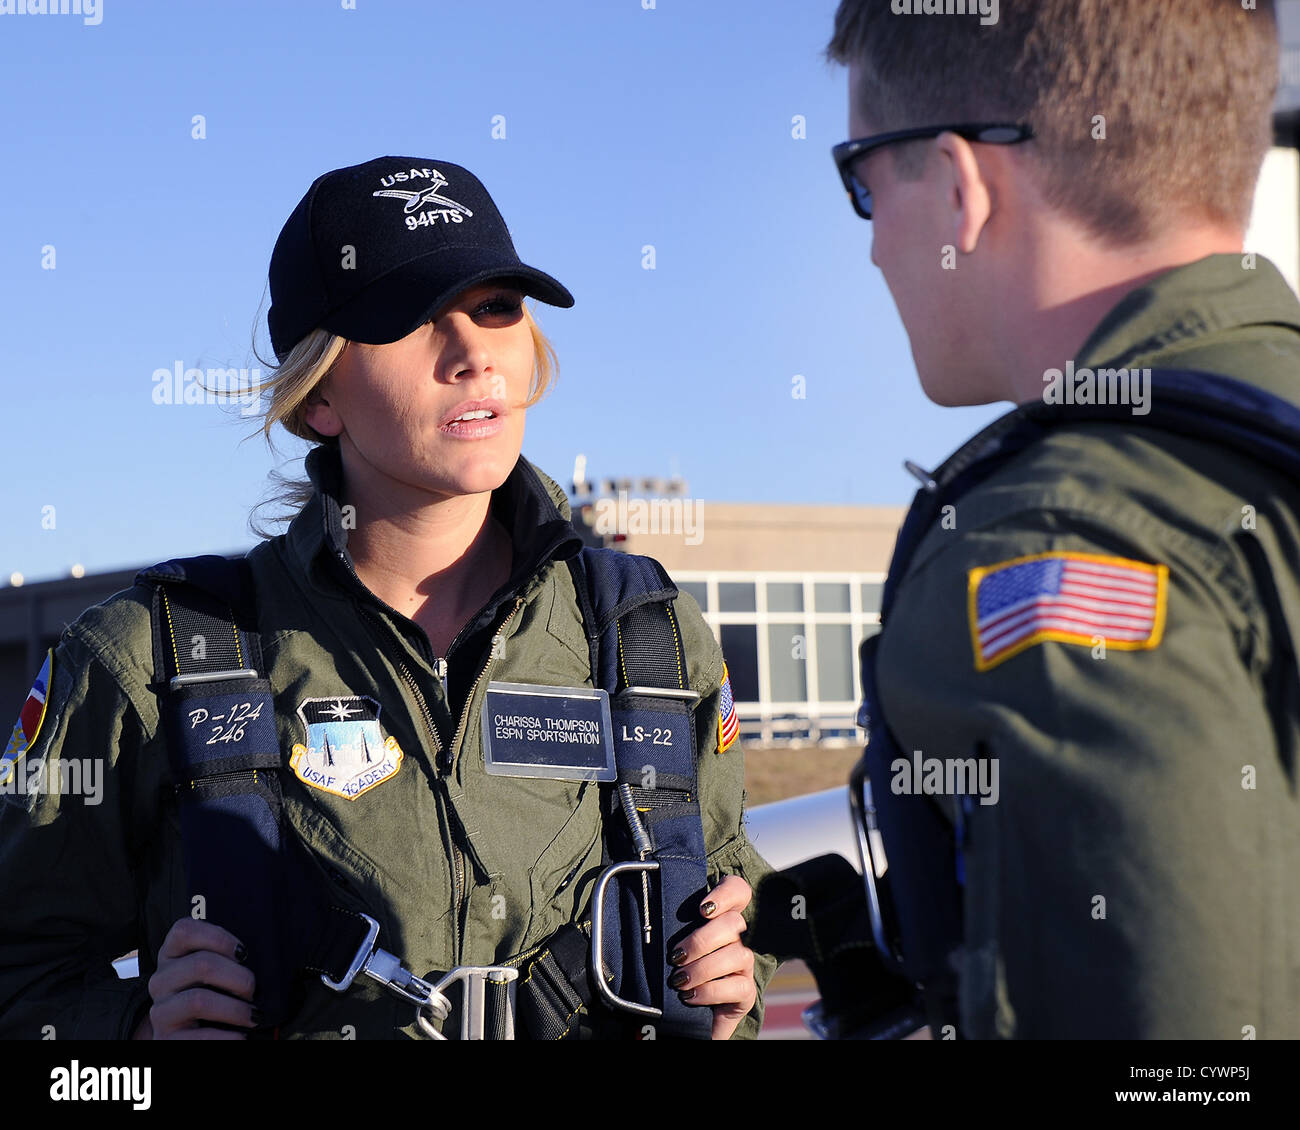 Cadet 1st Class James Bloch, a TG-16A glider Instructor Pilot briefs EPSN's Charissa Thompson before a glider orientation flight at the U.S. Air Force Academy's airfield in Colorado Springs, Colo. Nov. 7, 2012. ESPN broadcast their SportsNation TV show li Stock Photo